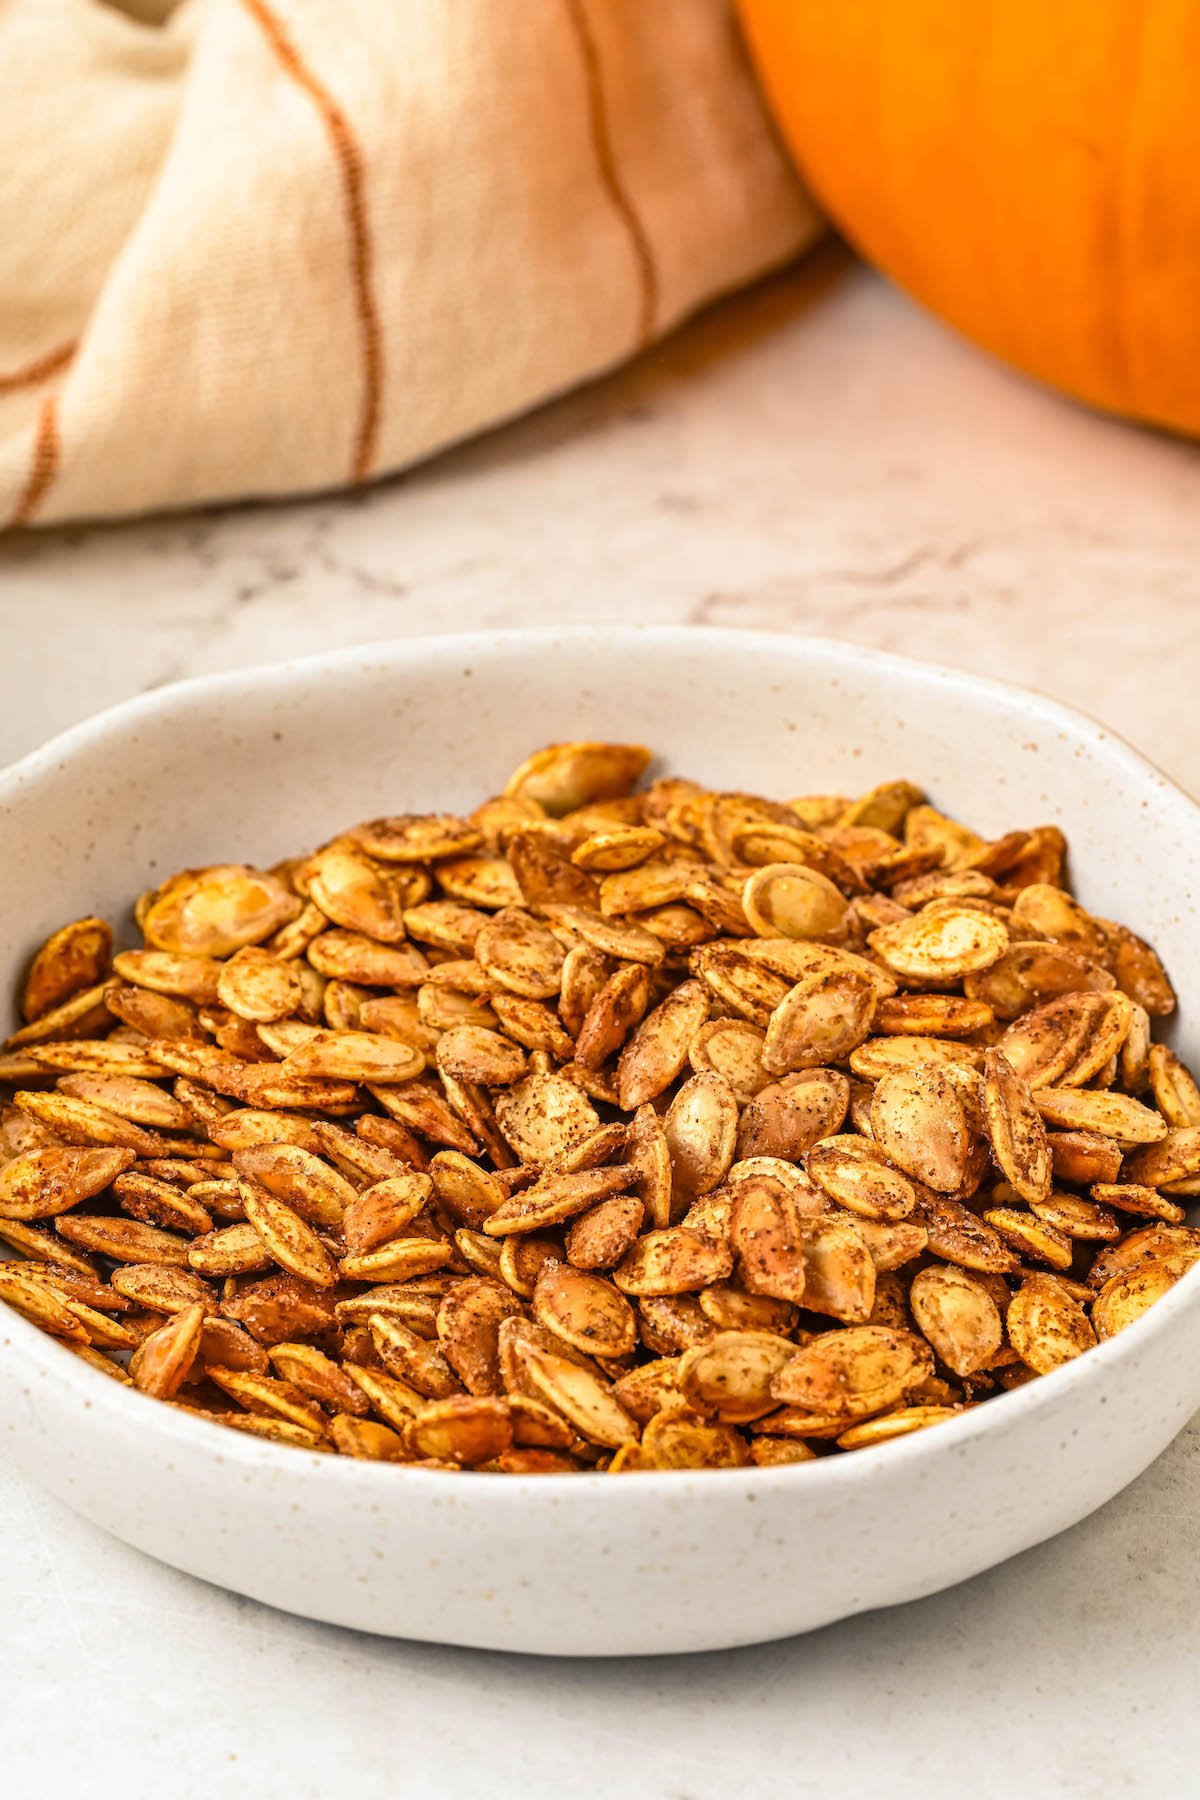 Baked pumpkin seeds in a white dish.